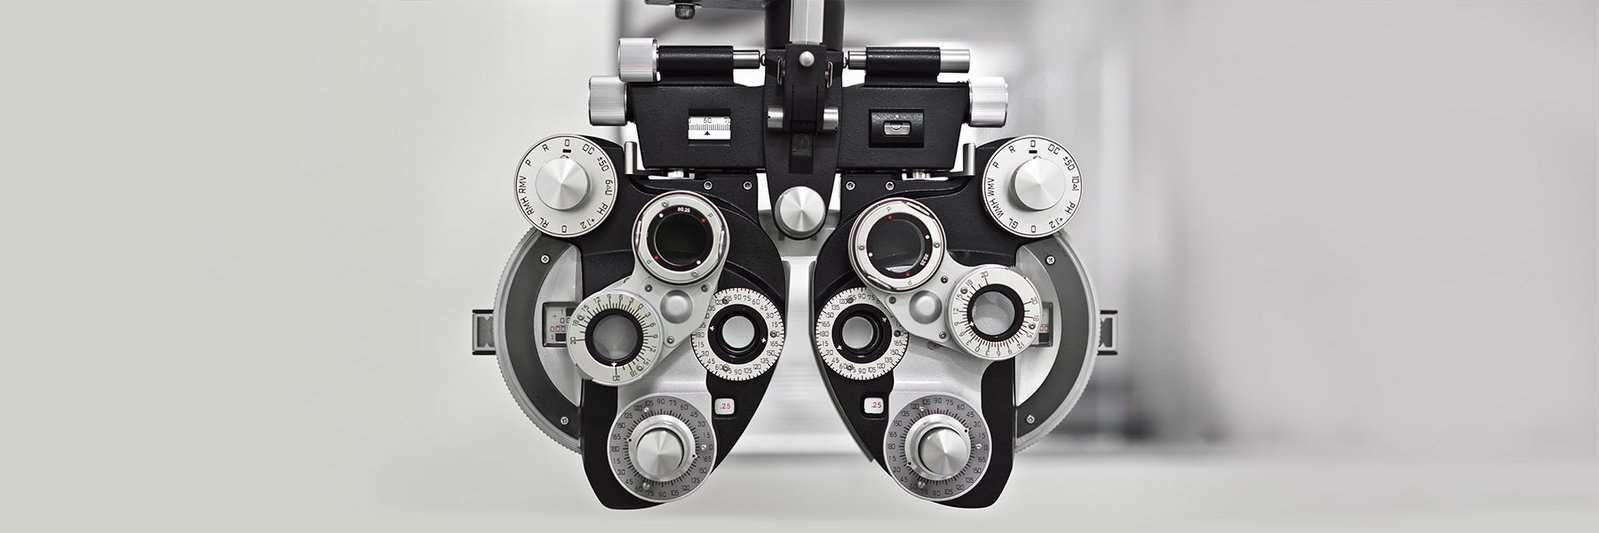 Going for an eye exam? Here's what you need to know